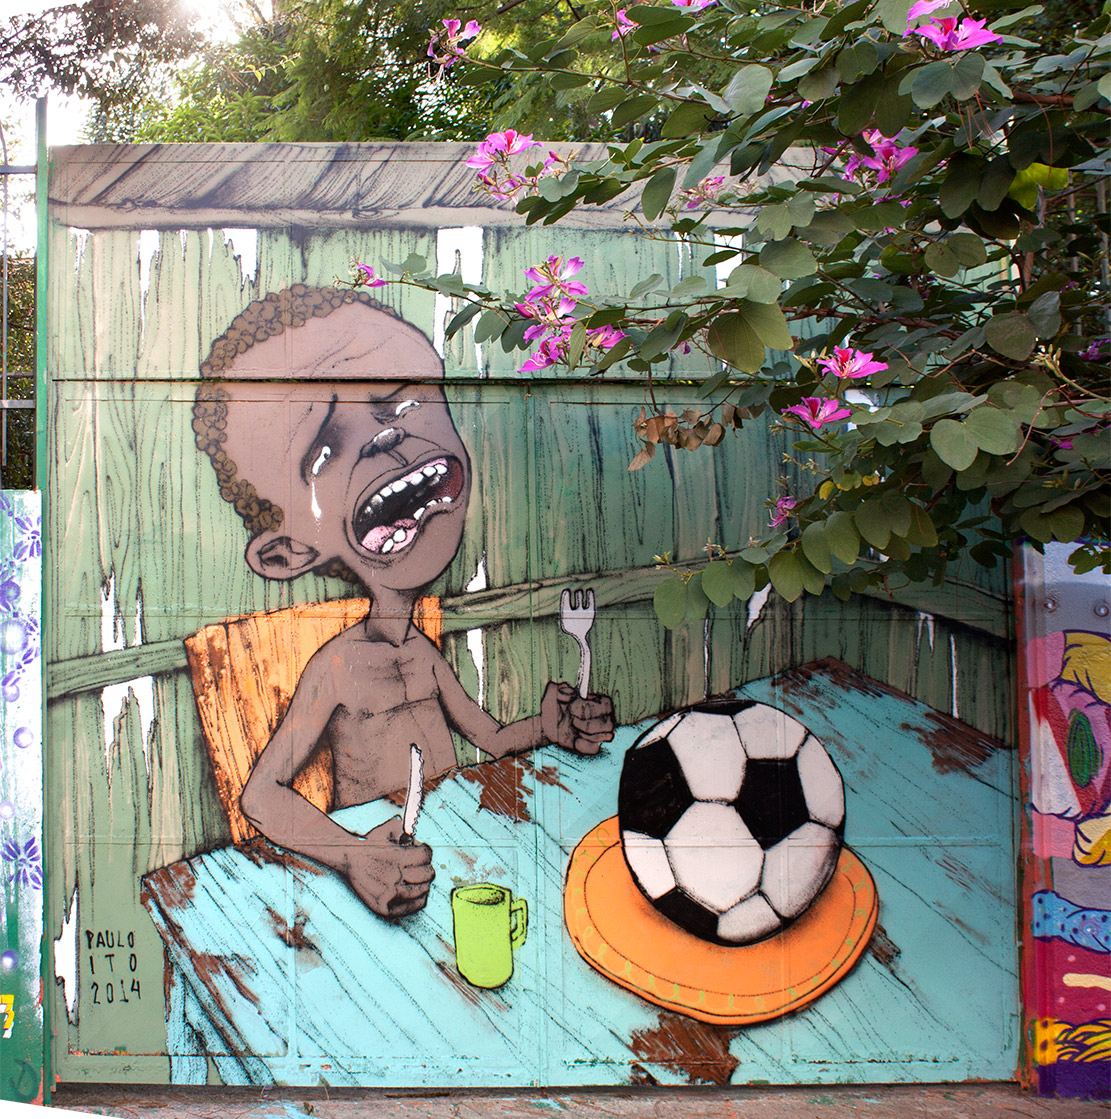 Street-Art-by-Paulo-Ito-in-Pompeia-S%C3%A3o-Paulo-Brazil-Comment-on-2014-FIFA-World-Cup-Brazil.jpg